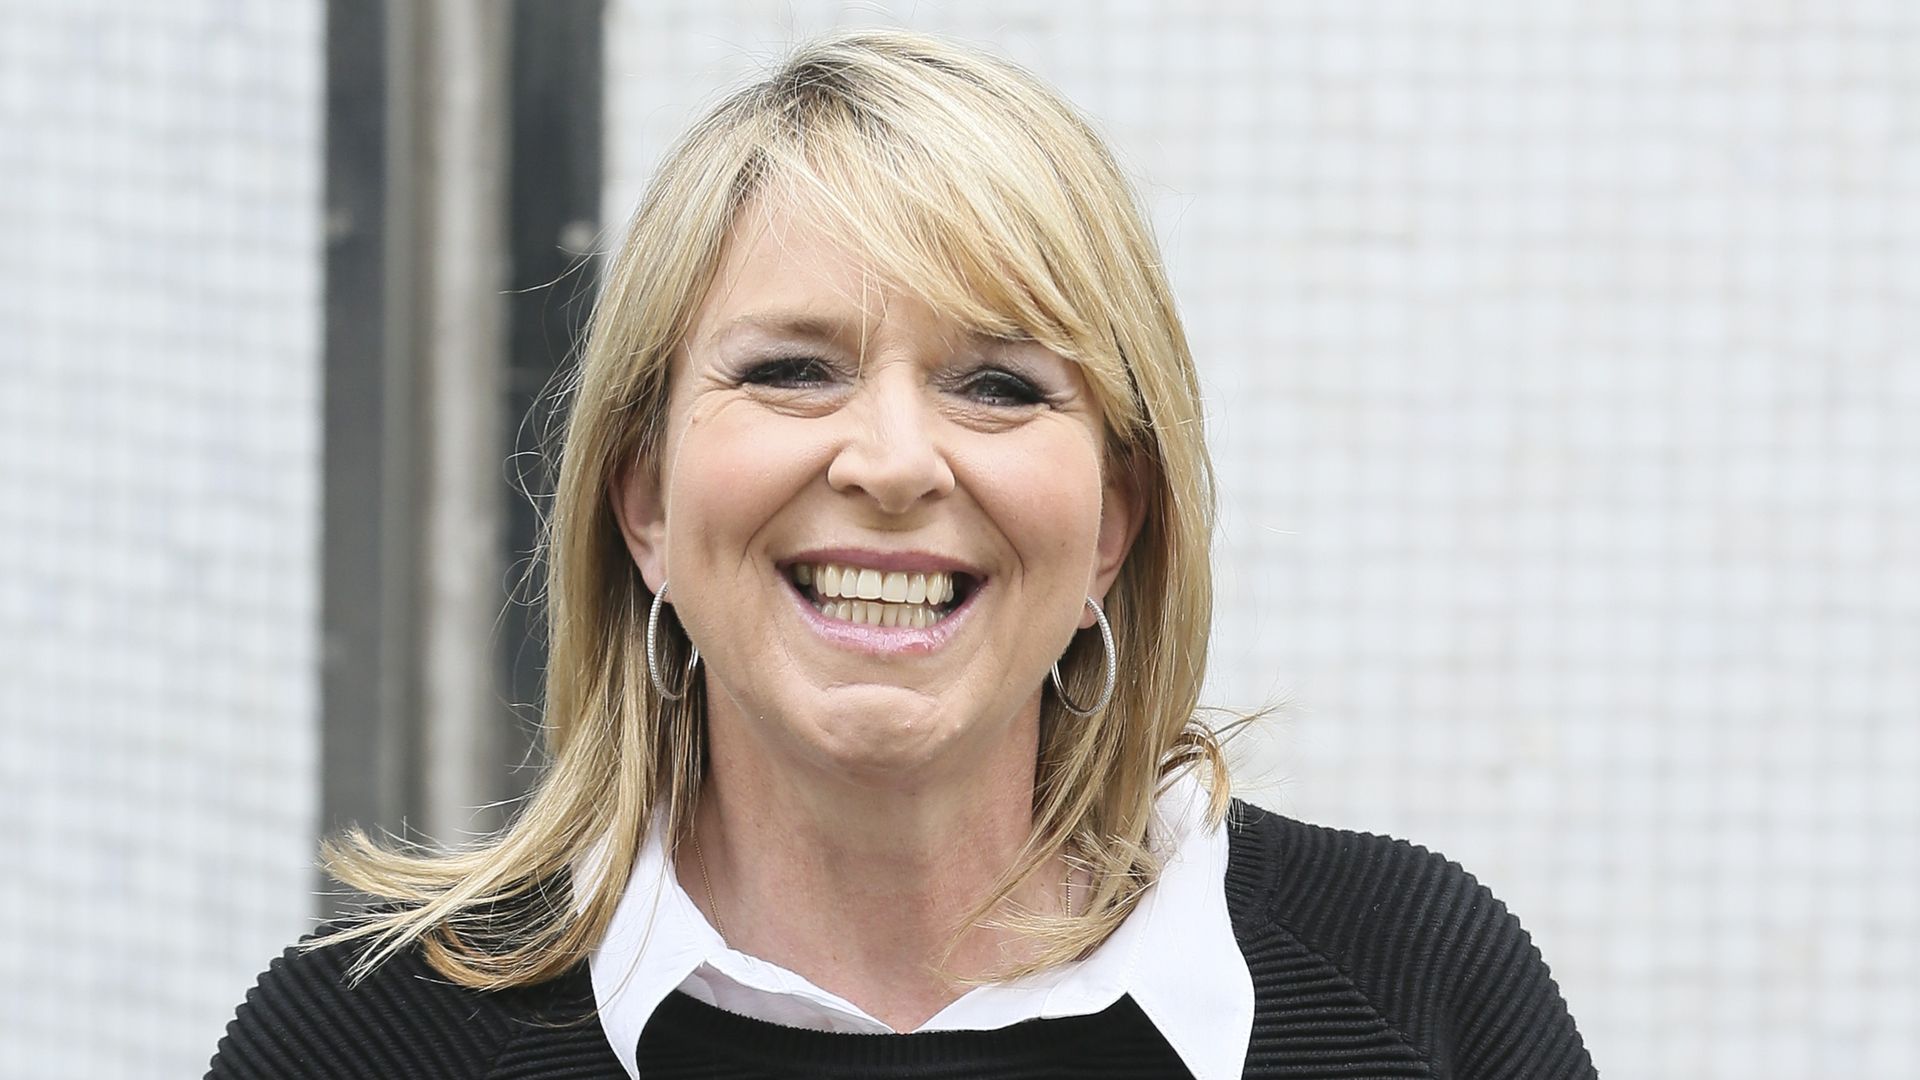 Fern Britton smiling and holding her book